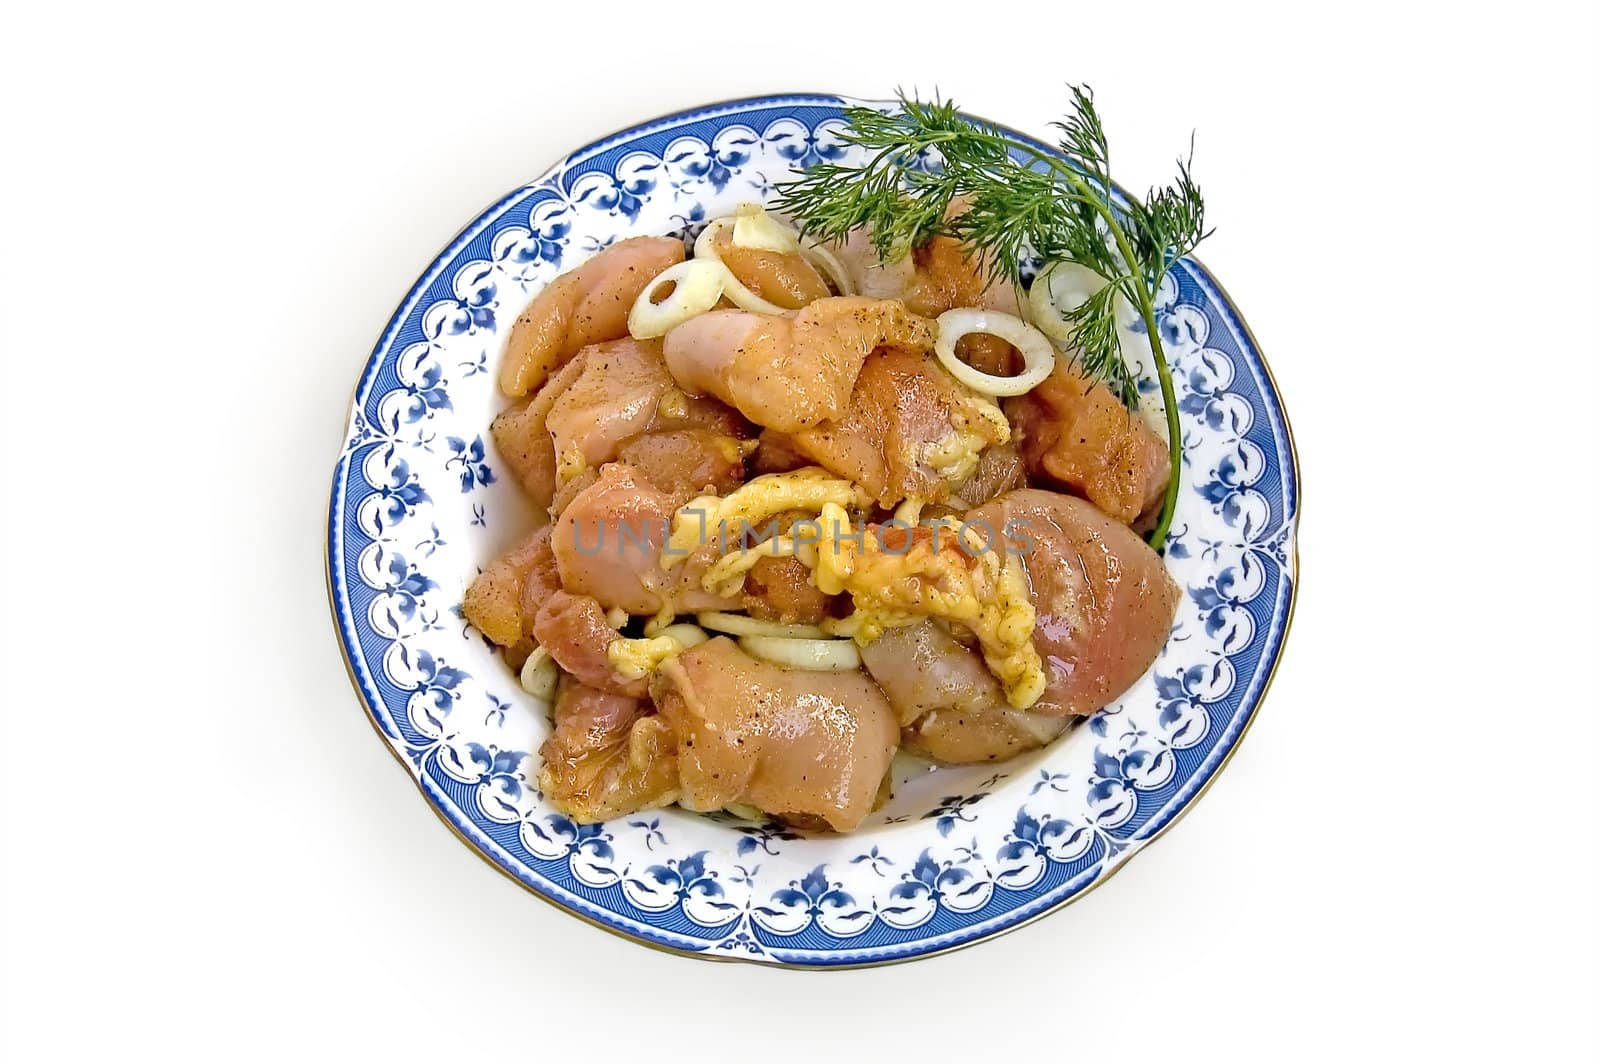 Chicken with spices, dill and onion slices on a plate on a white background